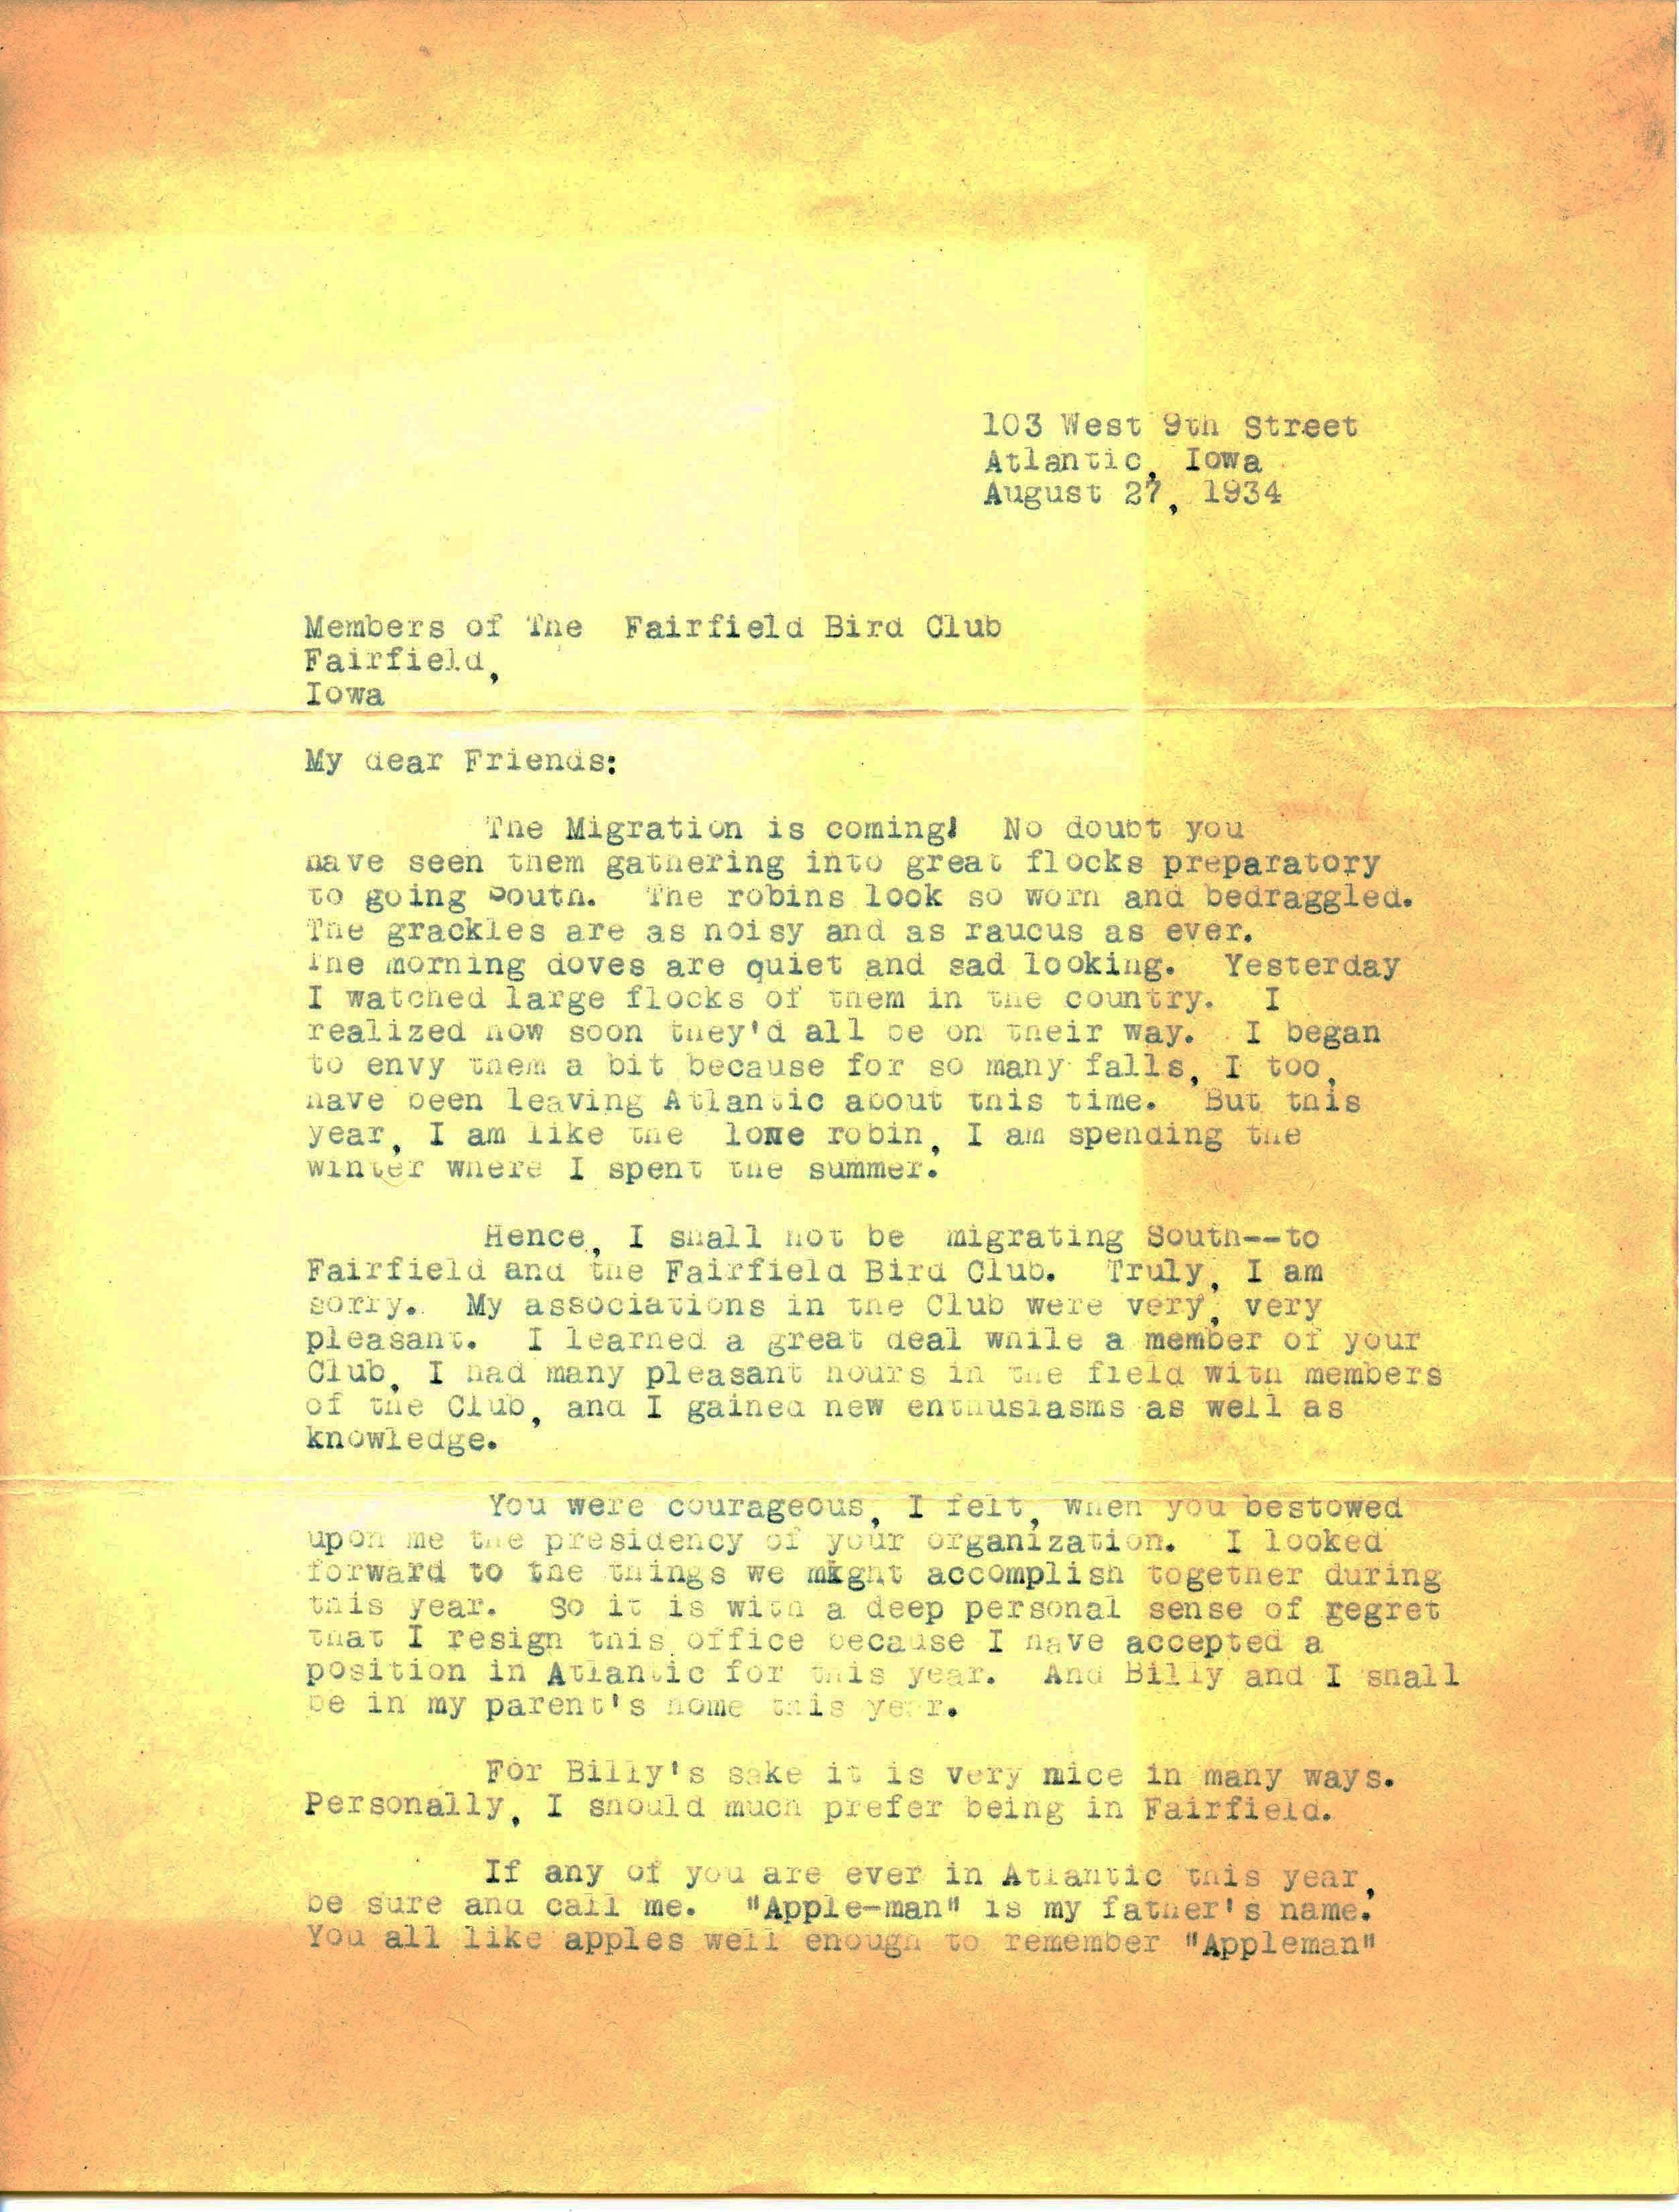 Mildrede Williams letter to members of the Fairfield Bird Club regarding her resignation as the club's president, August 27, 1934